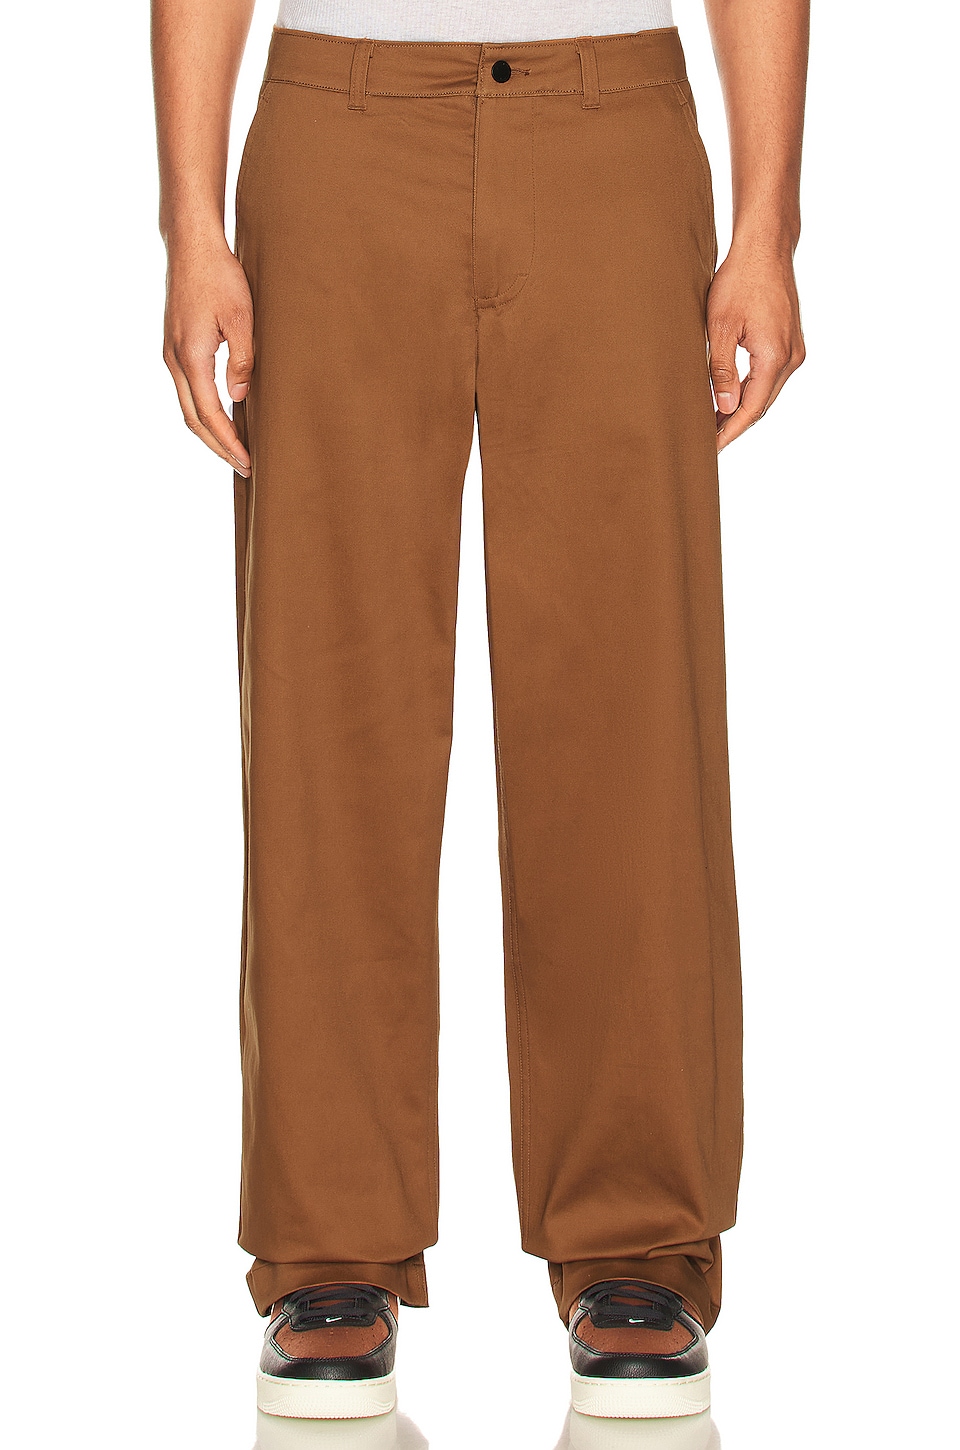 Nike M Nl El Chino Ul in Ale | Brown/White Cotton REVOLVE Pant